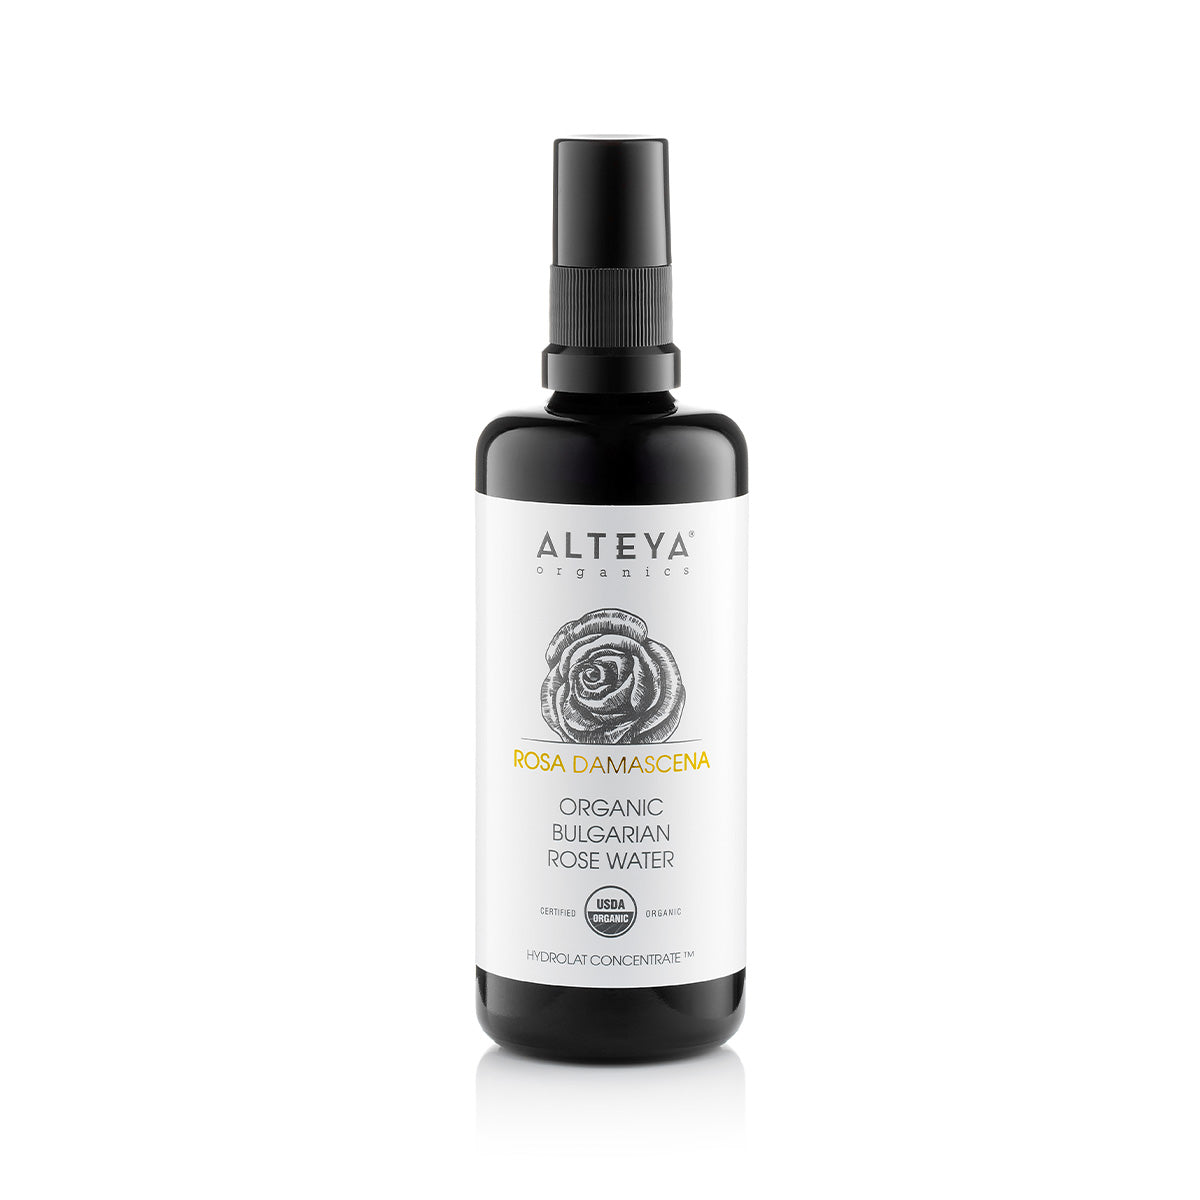 An Alteya Organics Organic Toner Mist 3.4 Fl Oz - Rose Water Violet Glass spray, infused with rose water for a refreshing skincare experience.